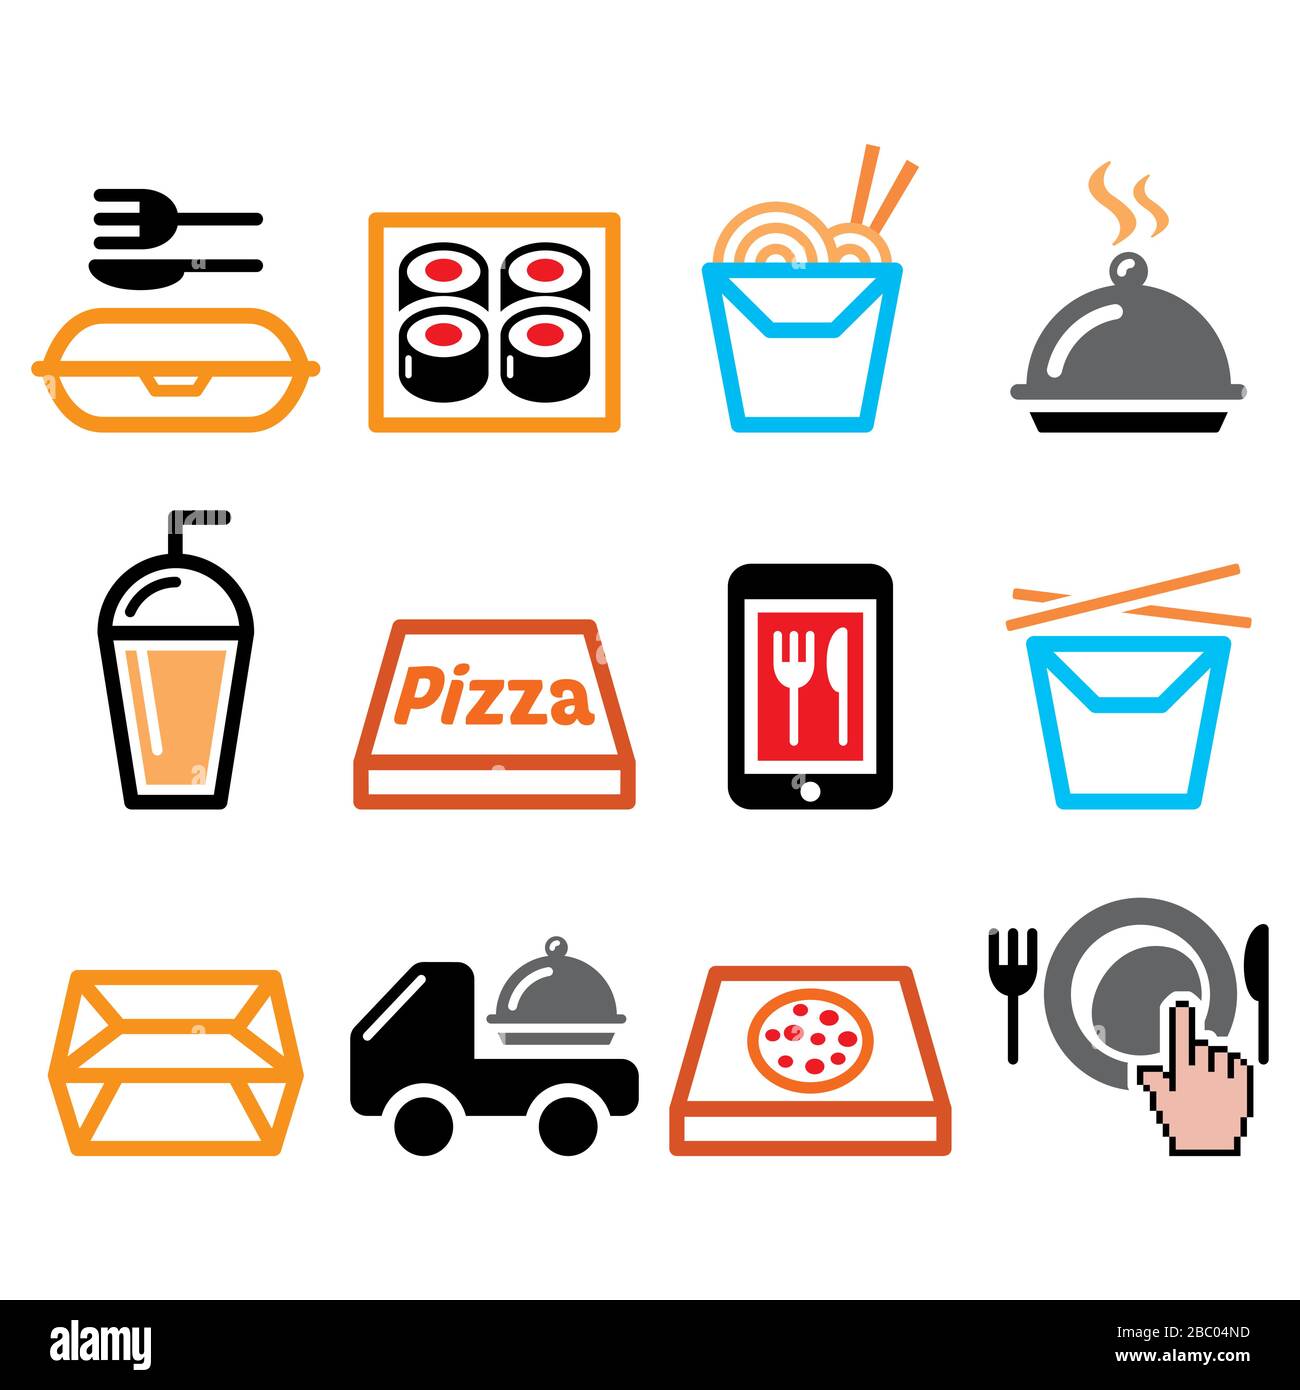 Take away box, meal vector icons set, Chinese food delivery, pizza and sushi bar take away design Stock Vector